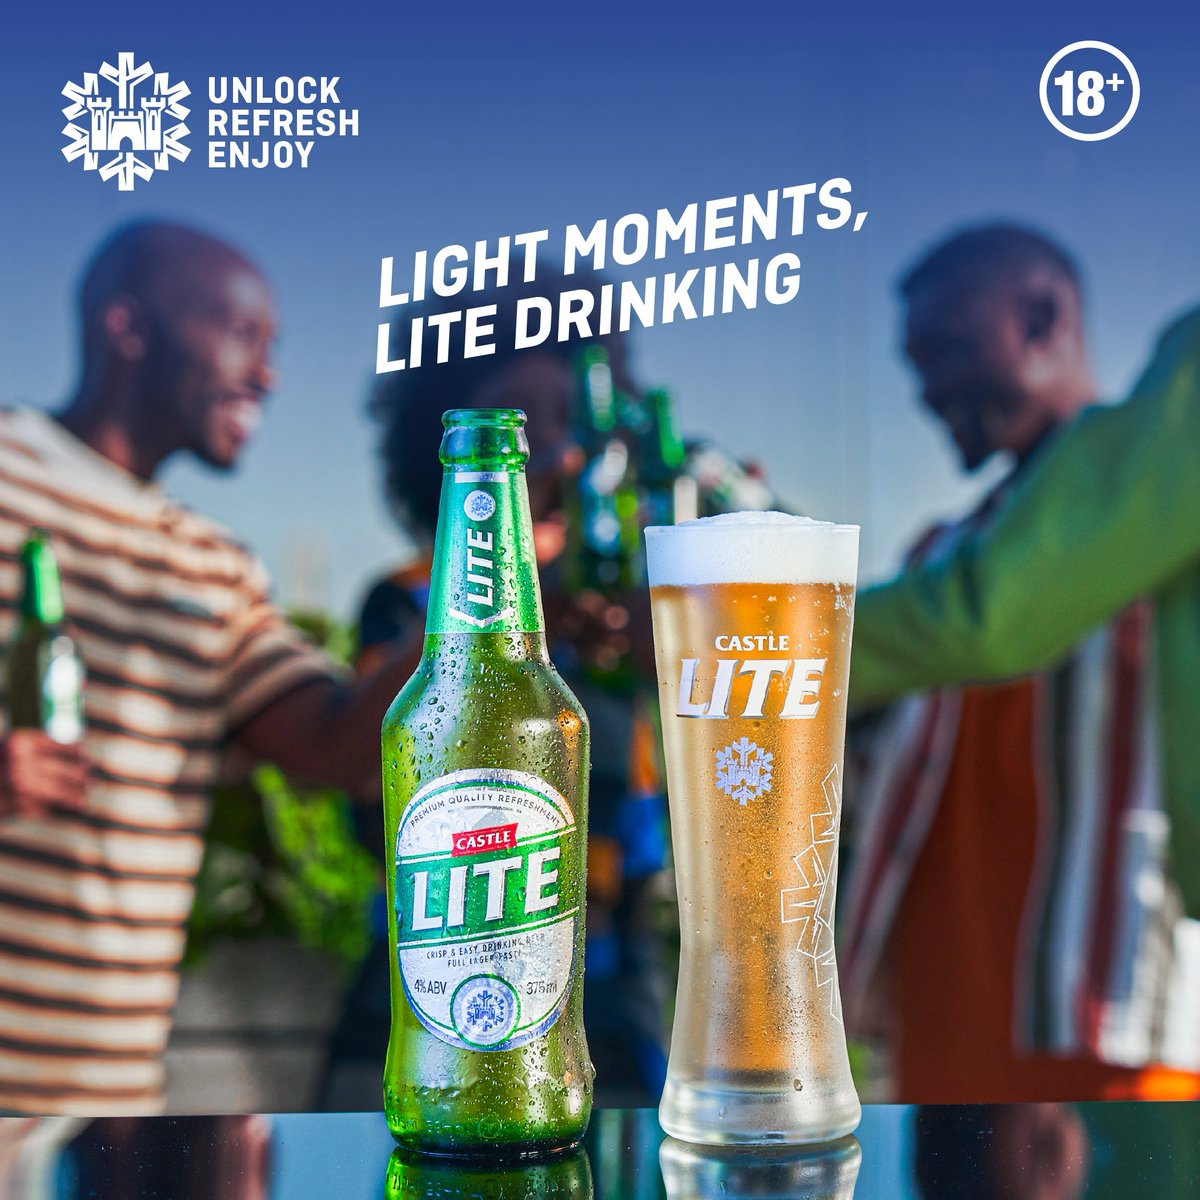 Create lite moments with your team this evening by trying the new look Castle Lite beer and discover the greatness it comes with. #WeHaveHitRefresh #UnlockRefreshEnjoy